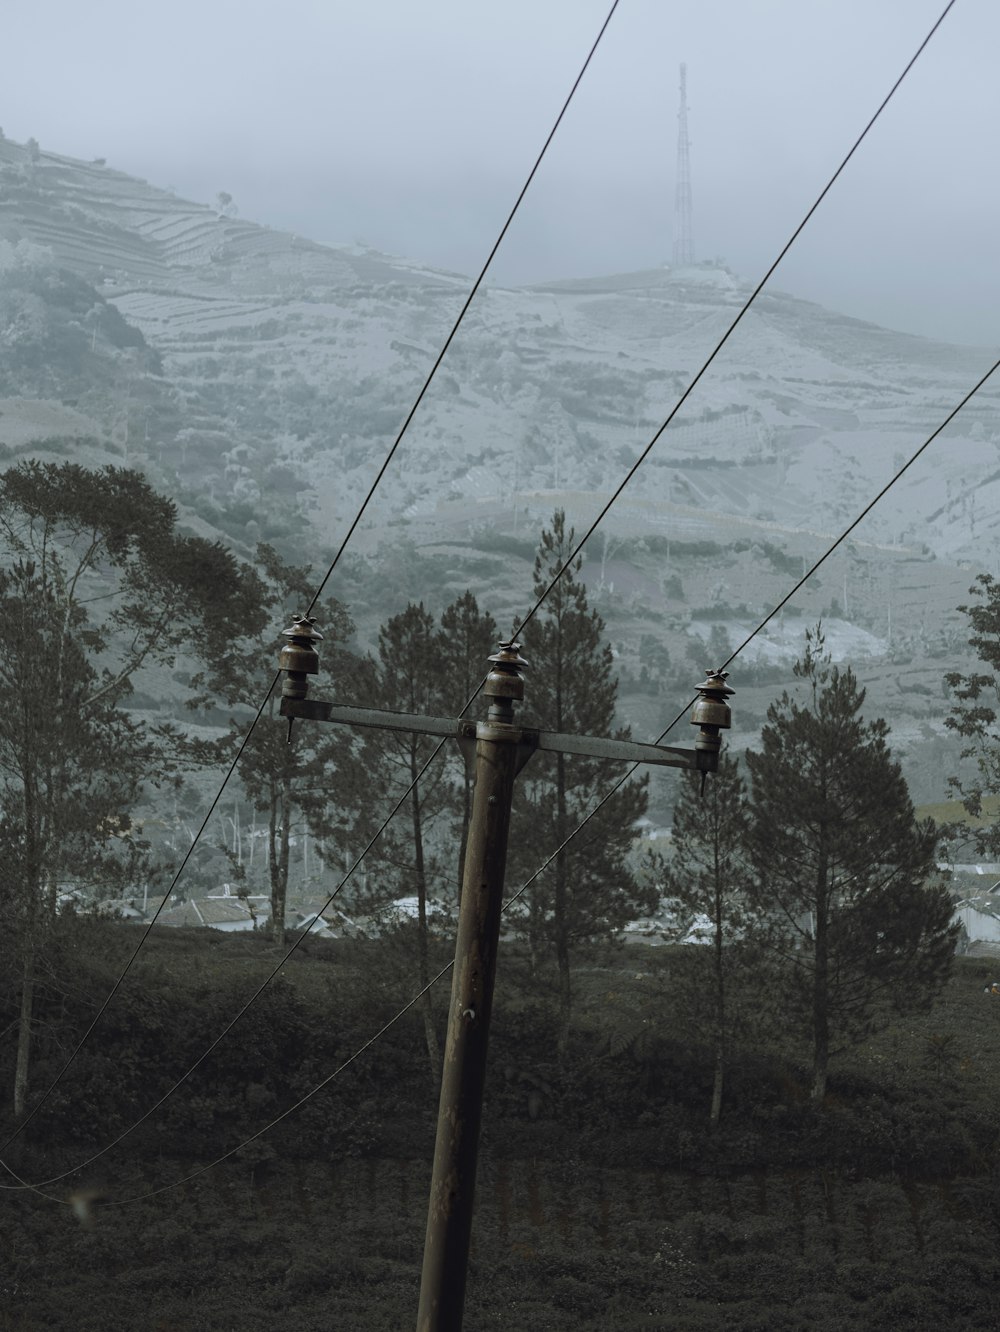 a view of a mountain with power lines in the foreground